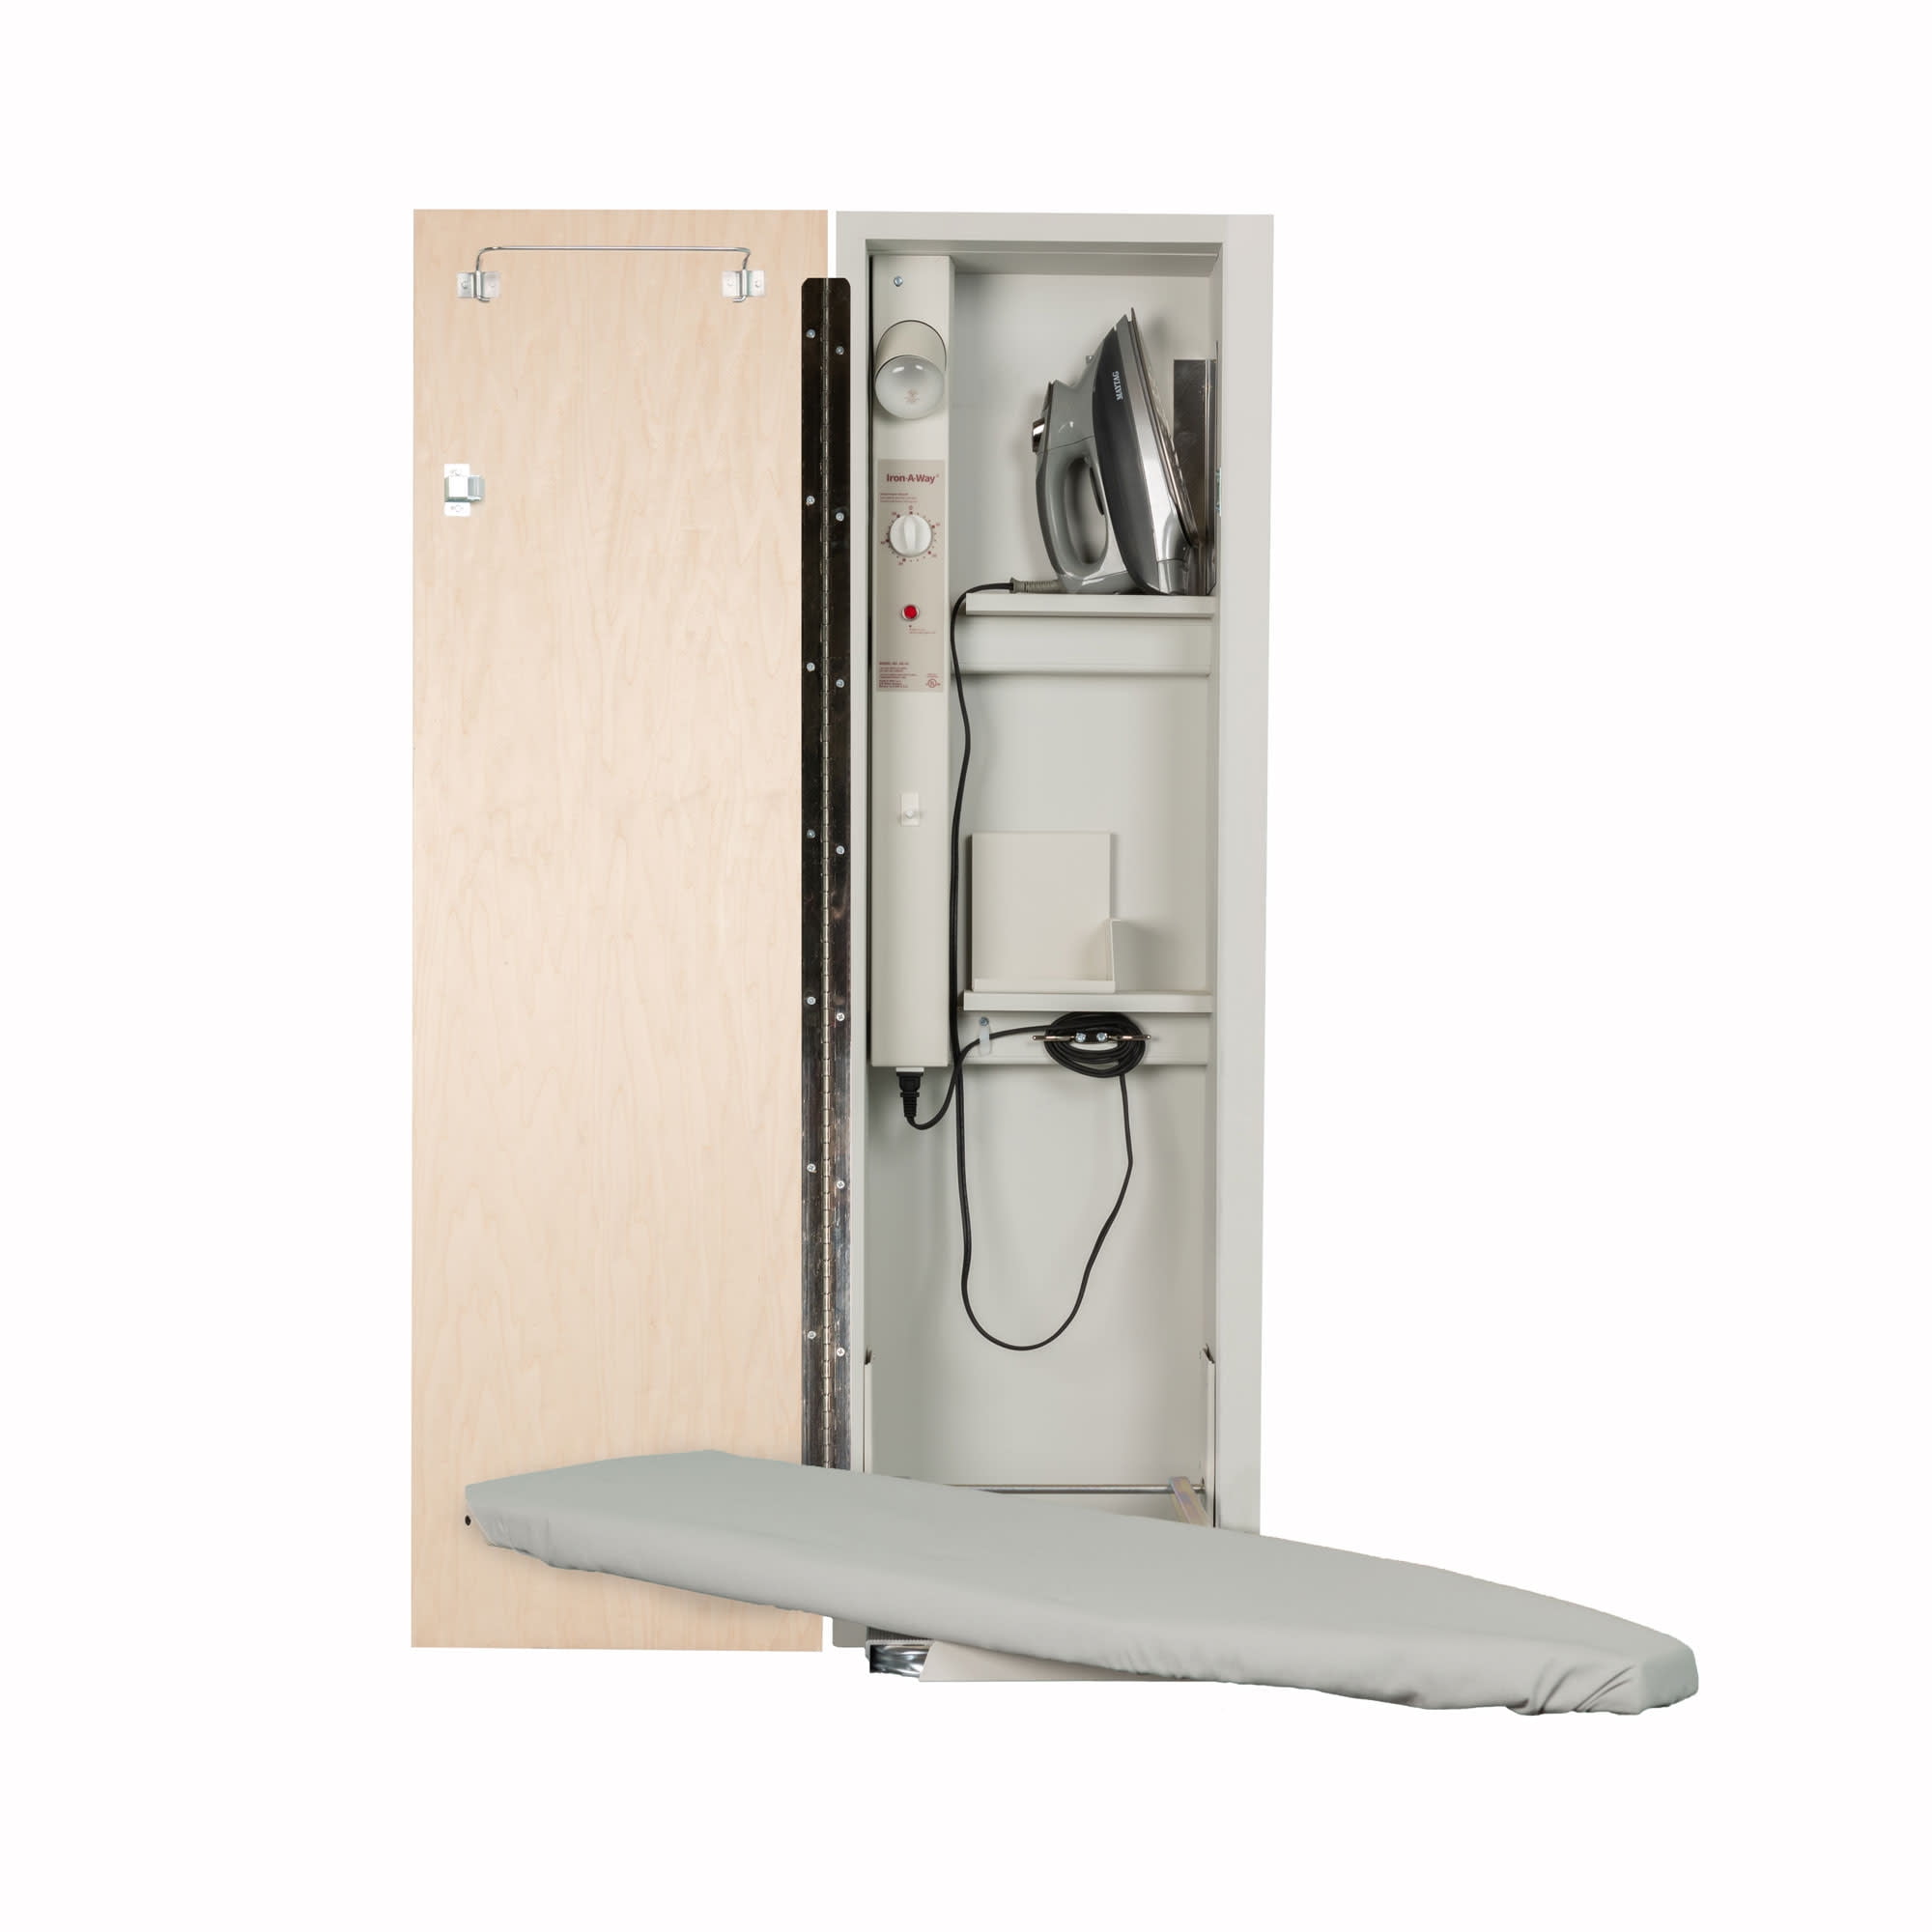 Details about   Wall-Mounted Space Saving Iron Board Ironing Board With turning mechanism White 